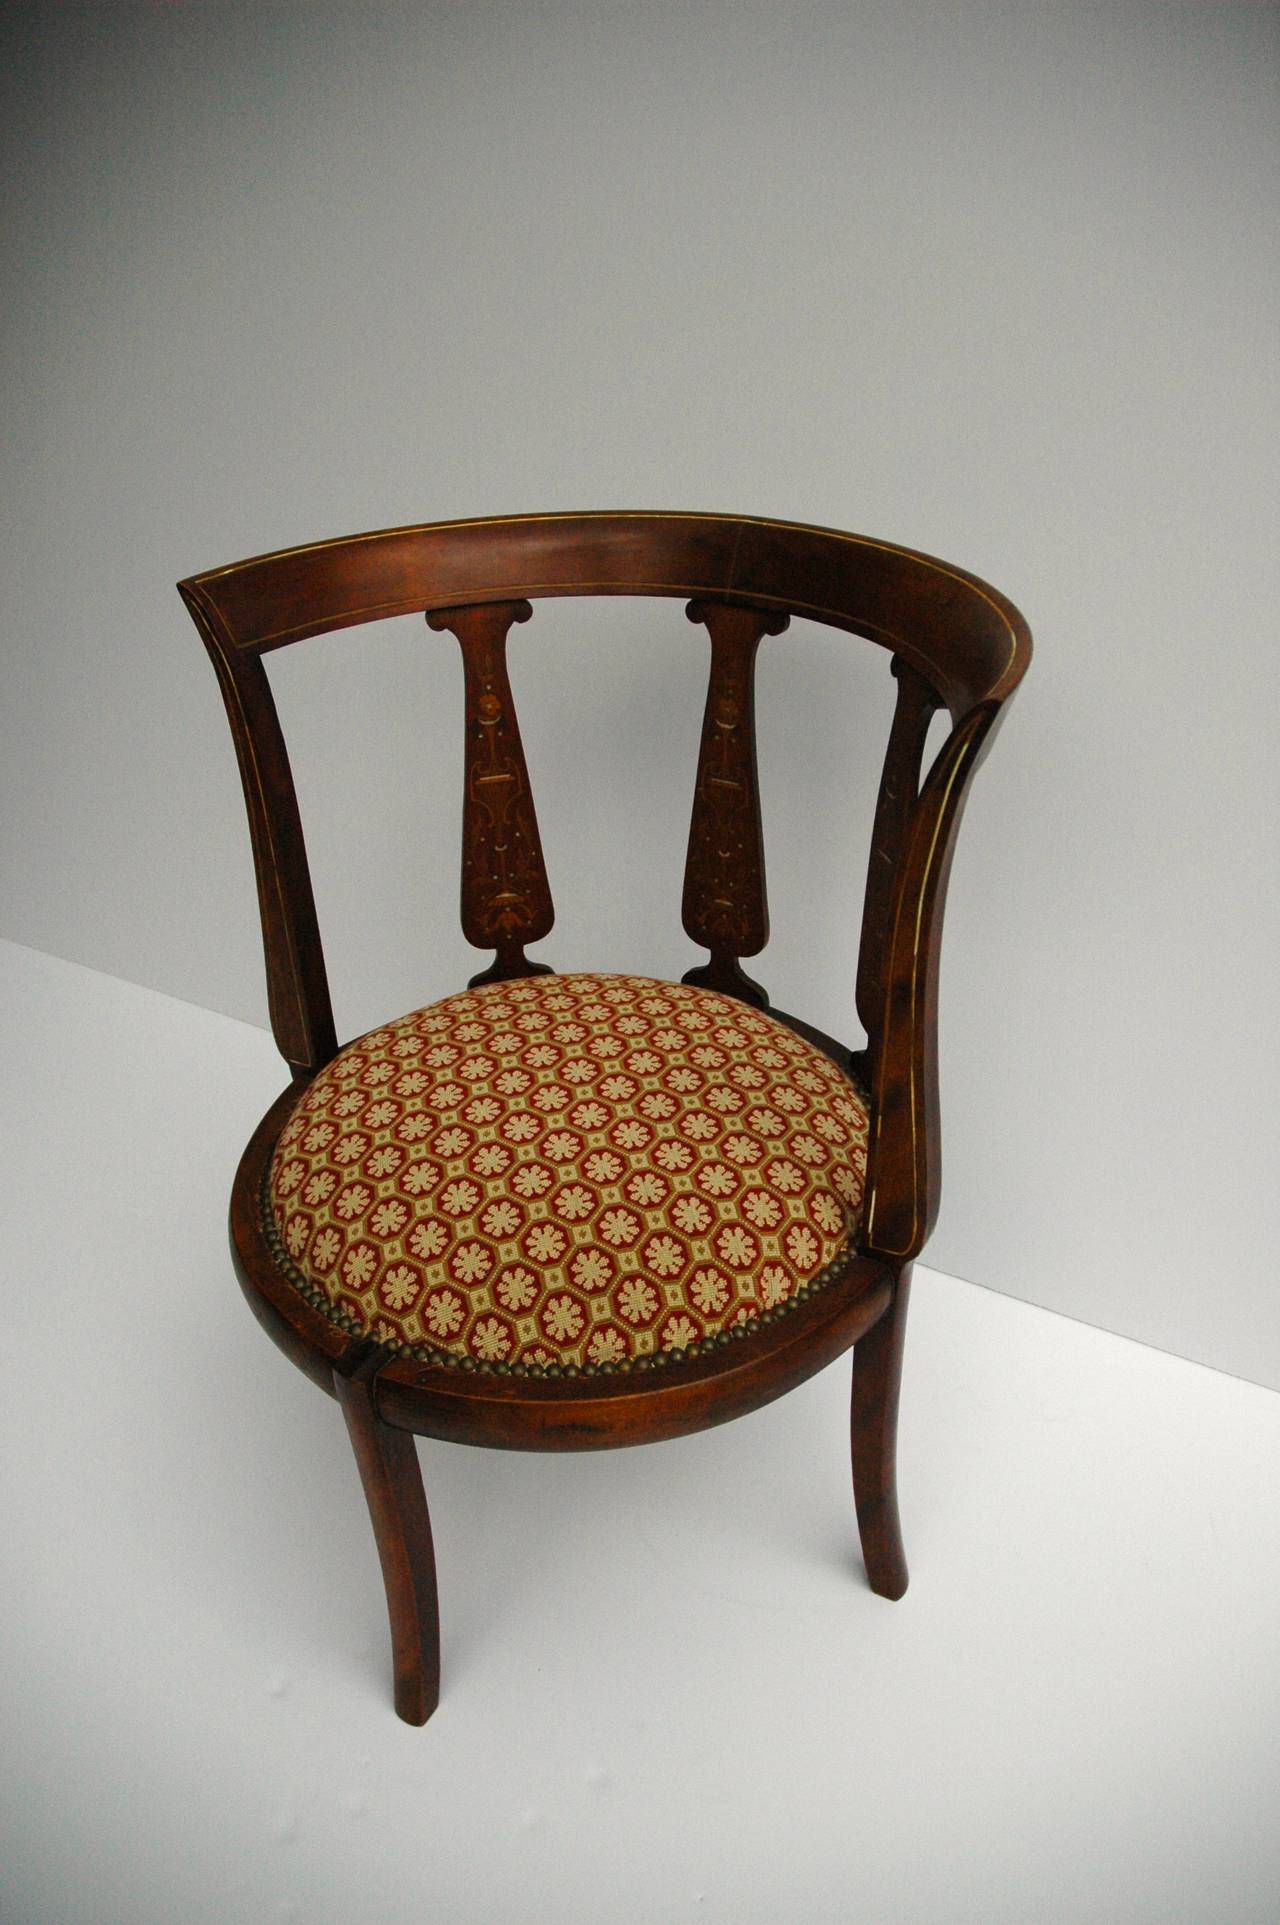 Georgian 19th Century English Corner Chair with Mother-of-pearl Inlay